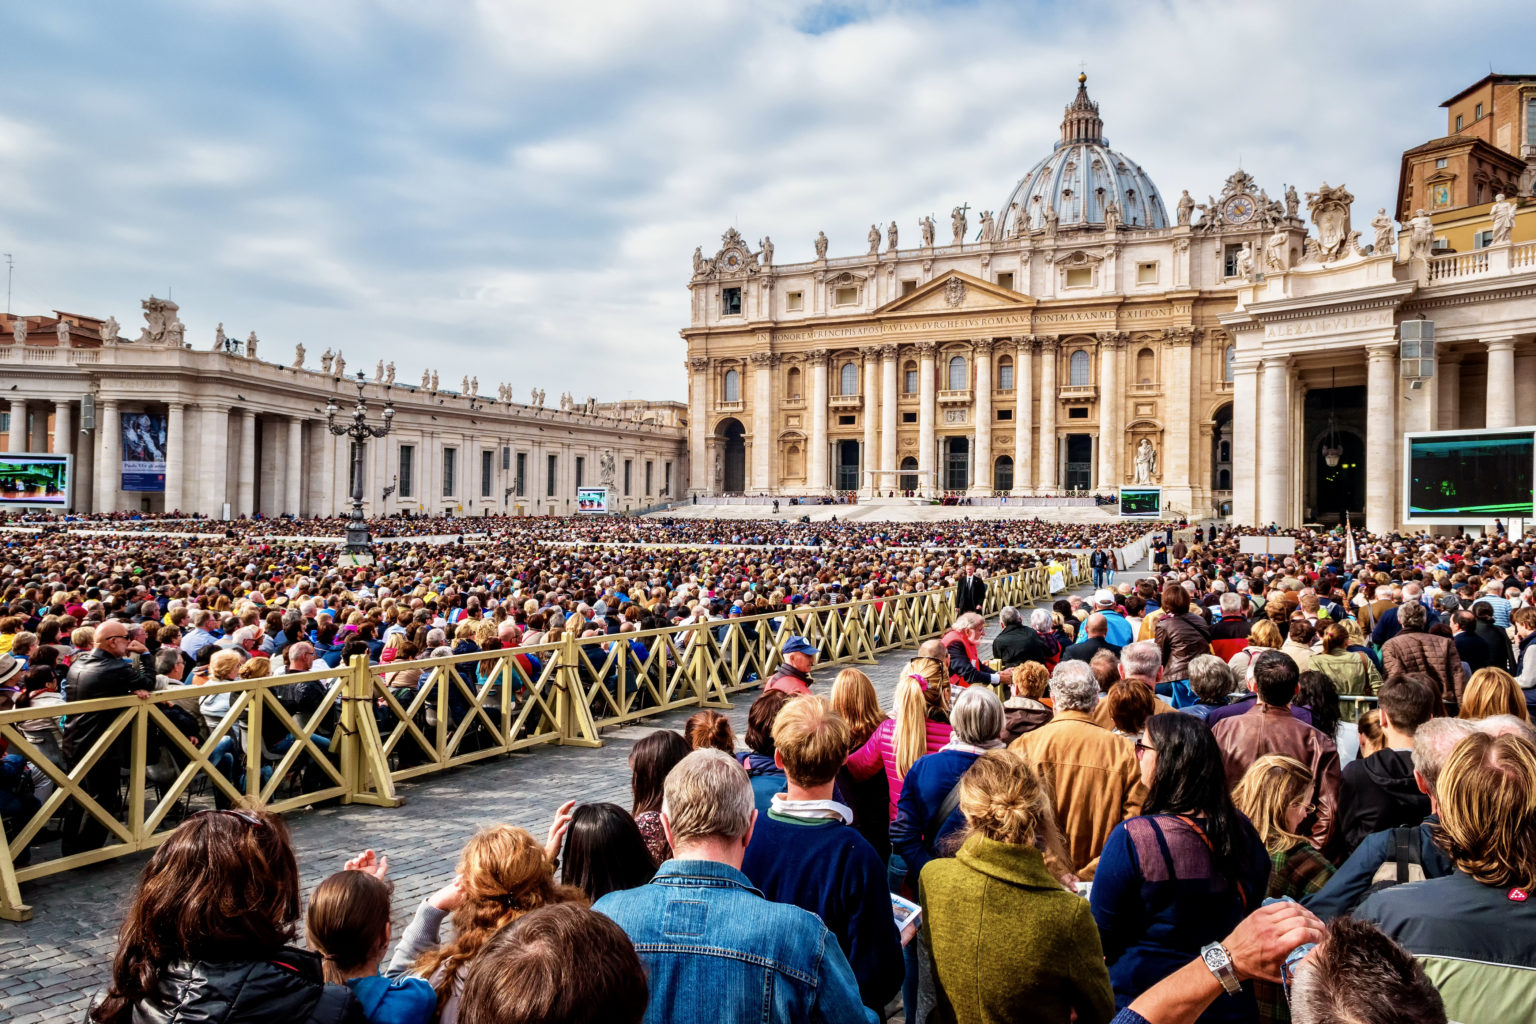 vatican tickets and tours promo code